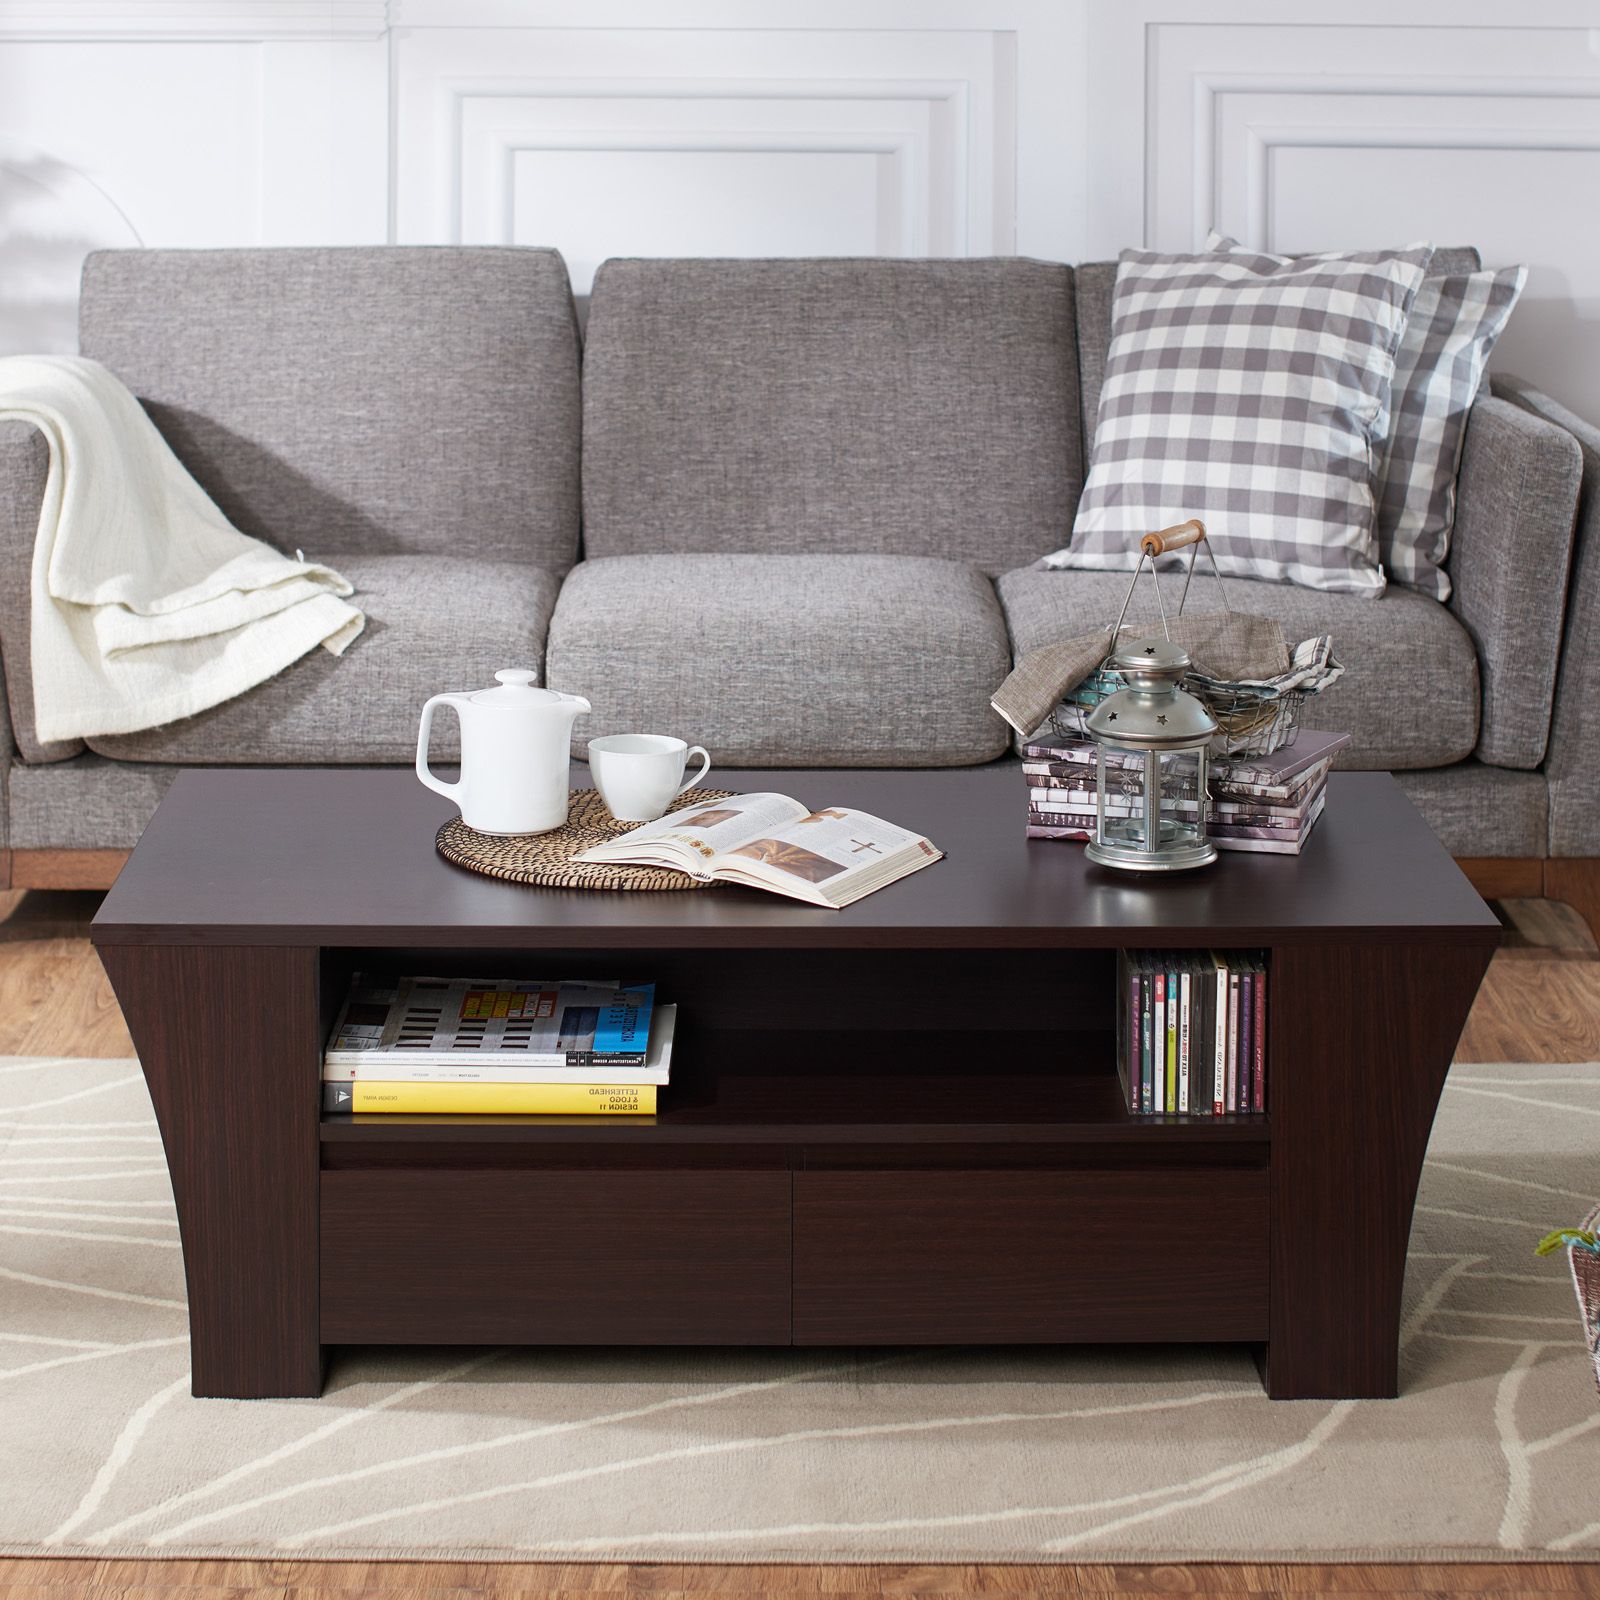 Furniture Of America 2 Drawer Coffee Table – Coffee Tables Throughout Current 2 Drawer Coffee Tables (View 8 of 20)